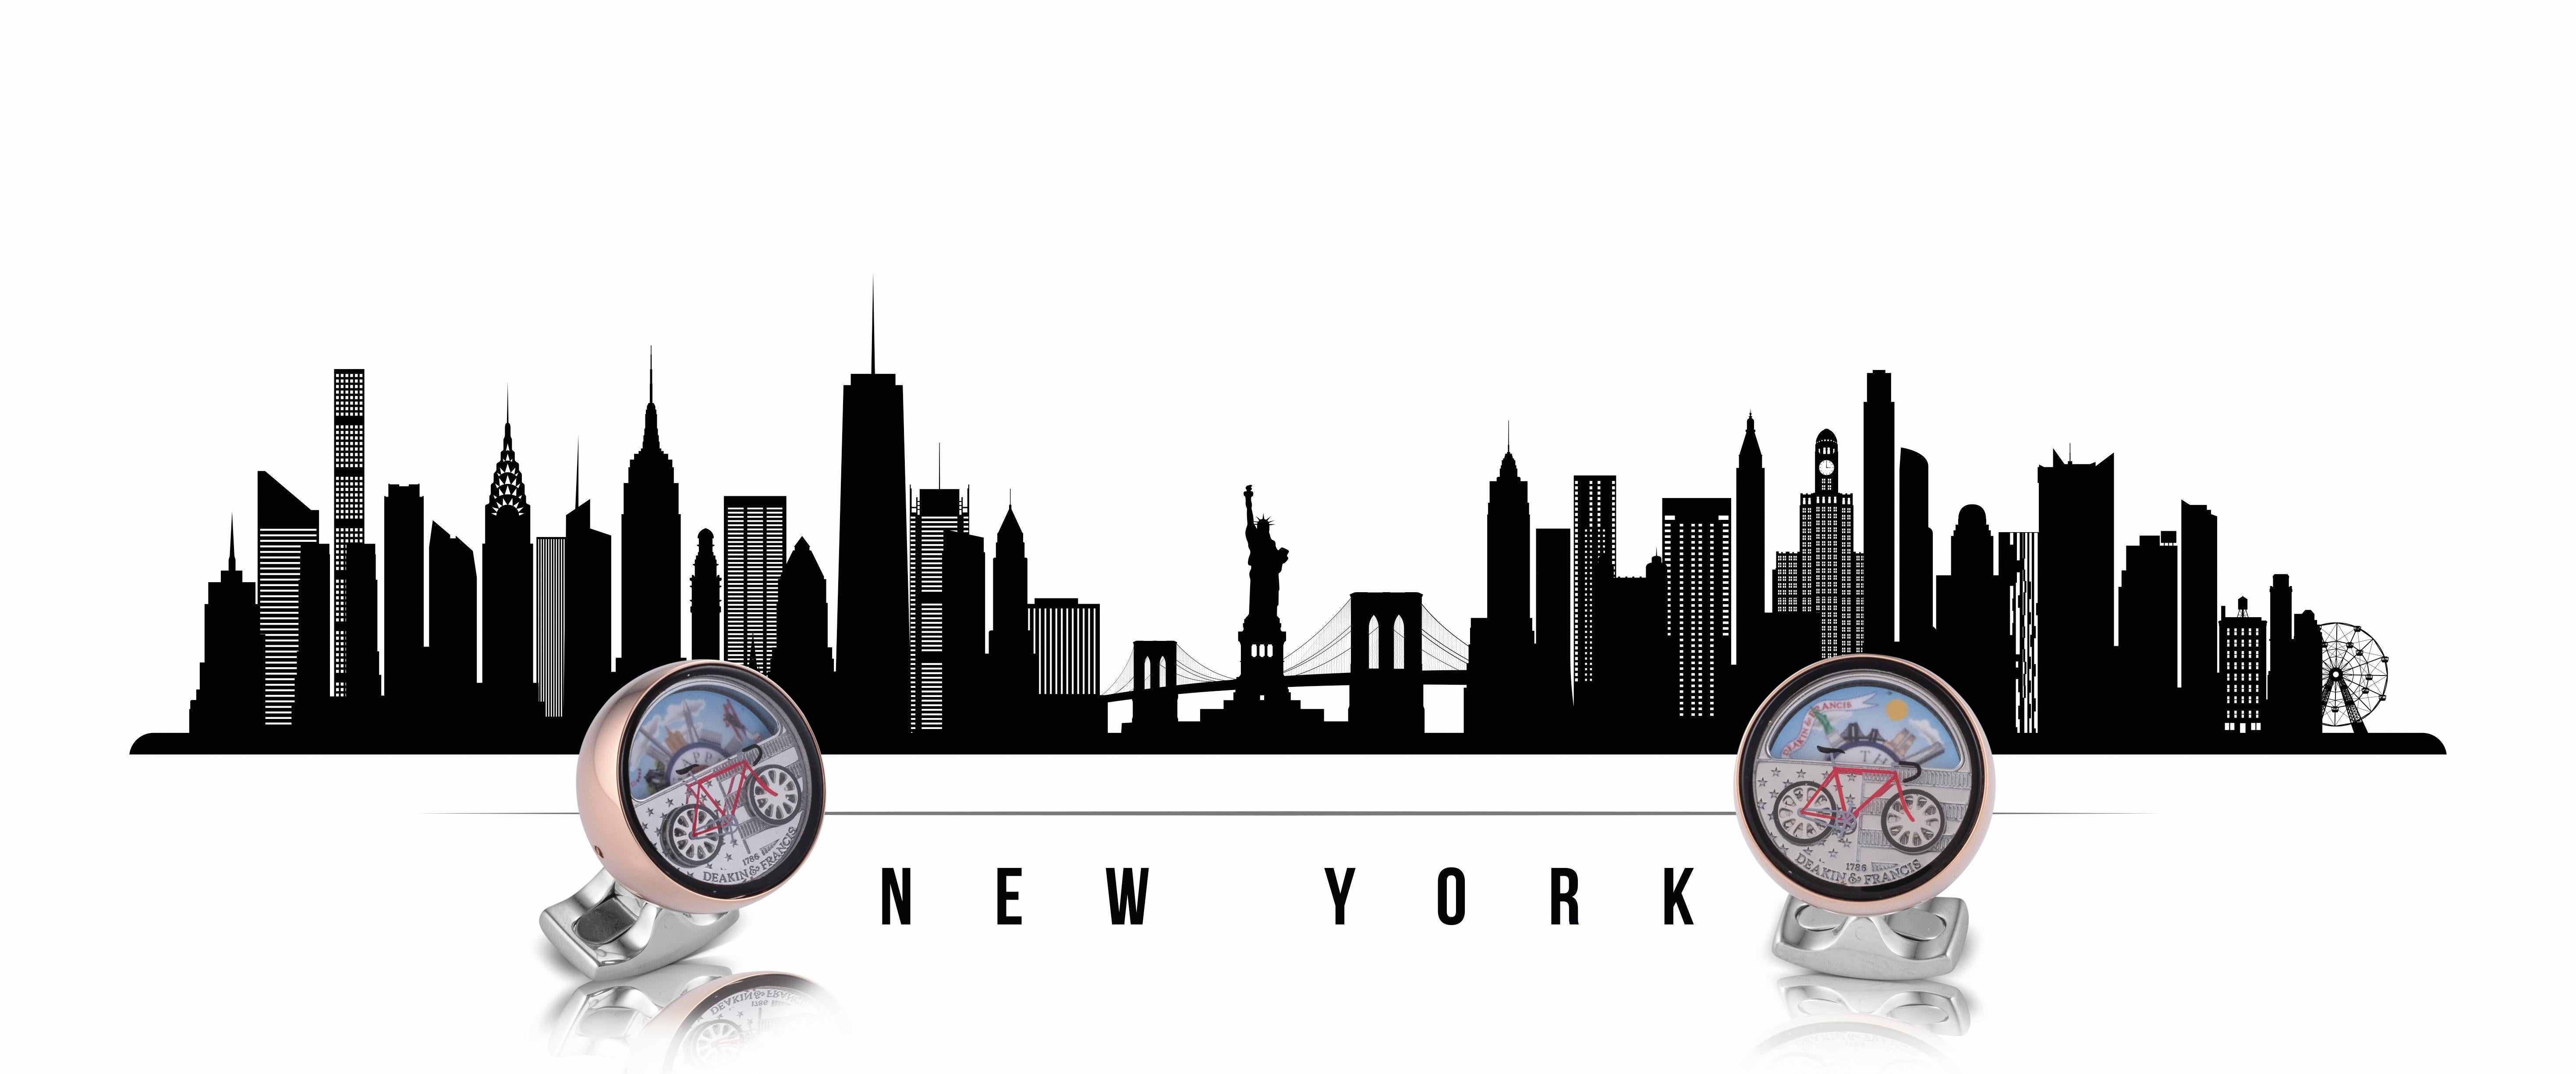 DEAKIN & FRANCIS, Piccadilly Arcade, London

Do you love a bit of sight-seeing, or like to marvel at the wonders of your favourite city? These moving scene cufflinks of New York are perfect for spotting your favourite tourist attractions.
Twist the